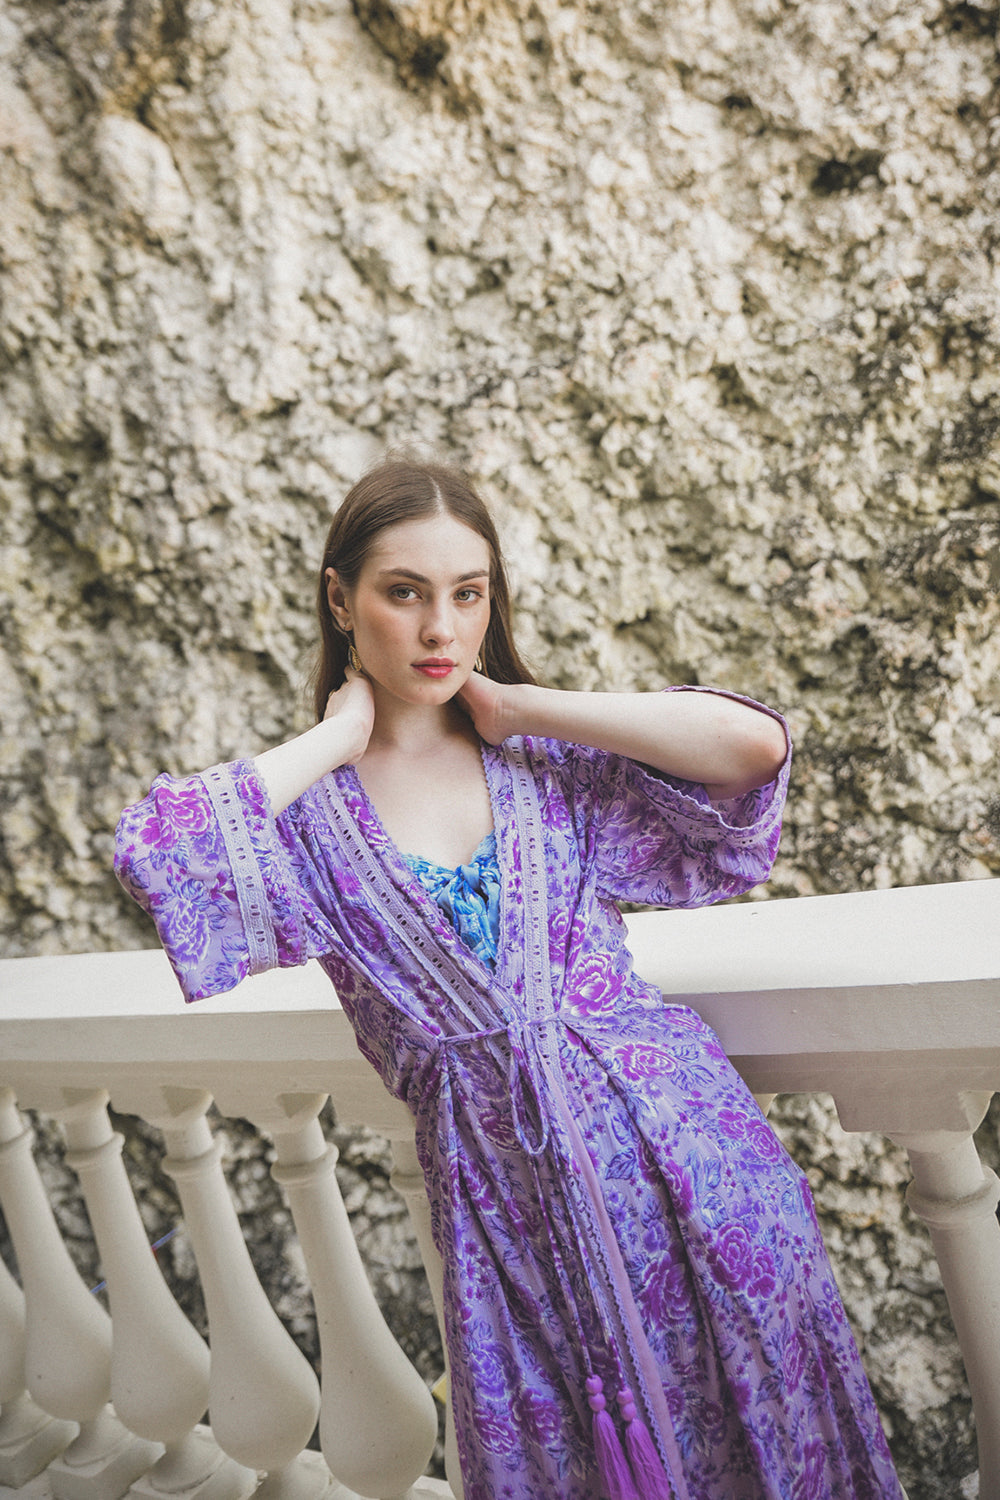 Experience the epitome of comfort and style with the Peony Long Robe, a modern boho kimono designed by Tulle and Batiste and handmade by Balinese artisans with ethical values